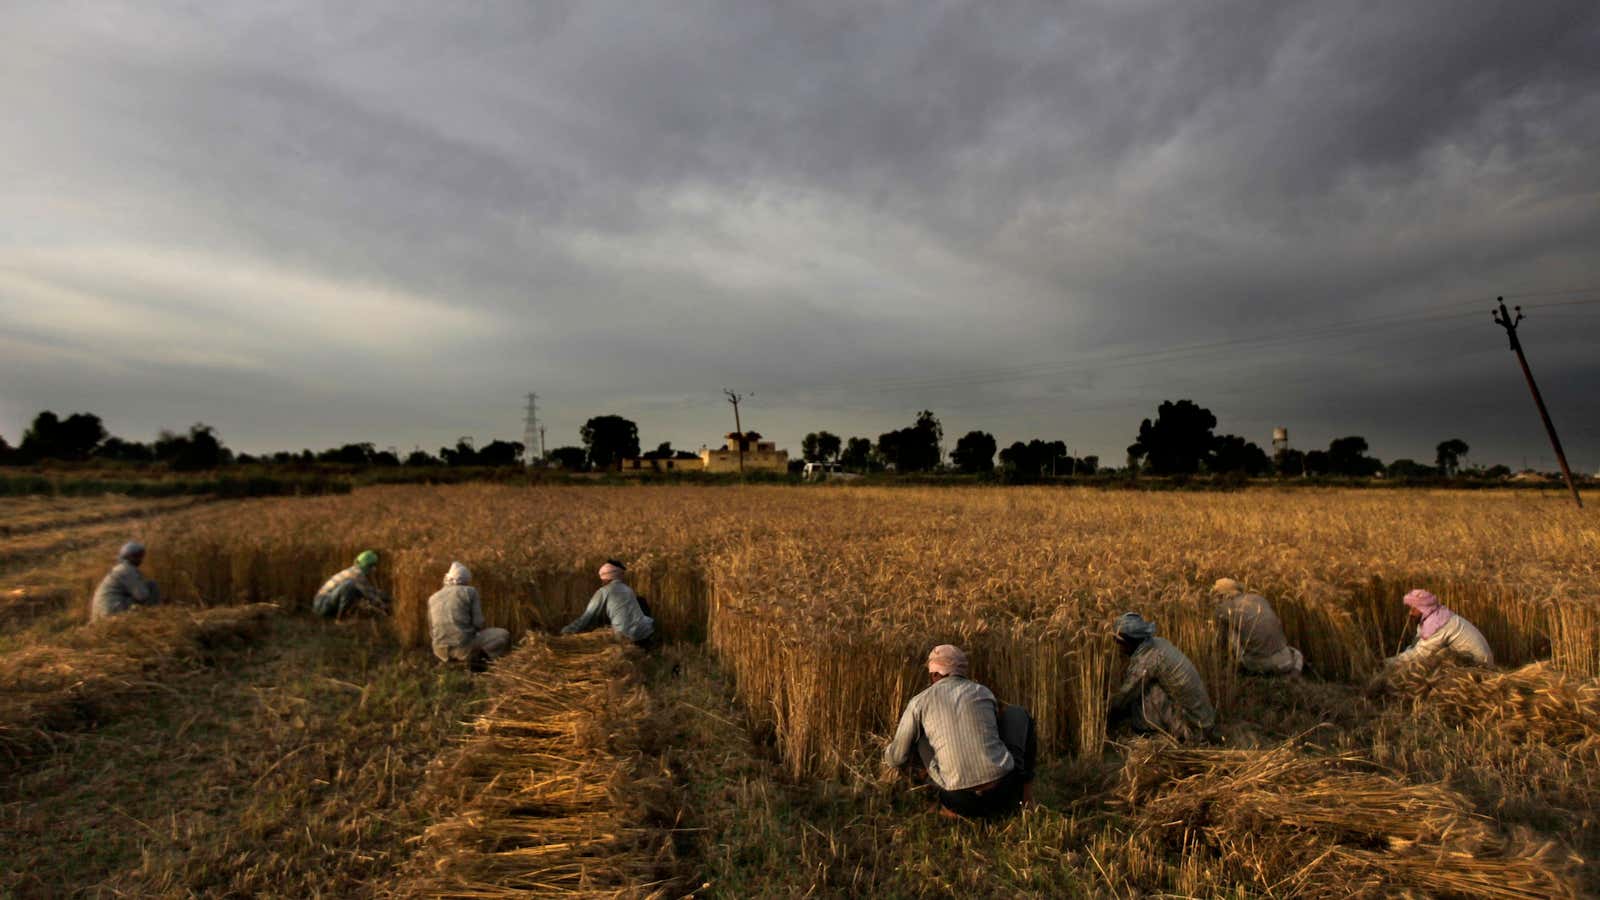 Heaps of rotting grain: the outcome of India’s inflation-boosting farm subsidies.